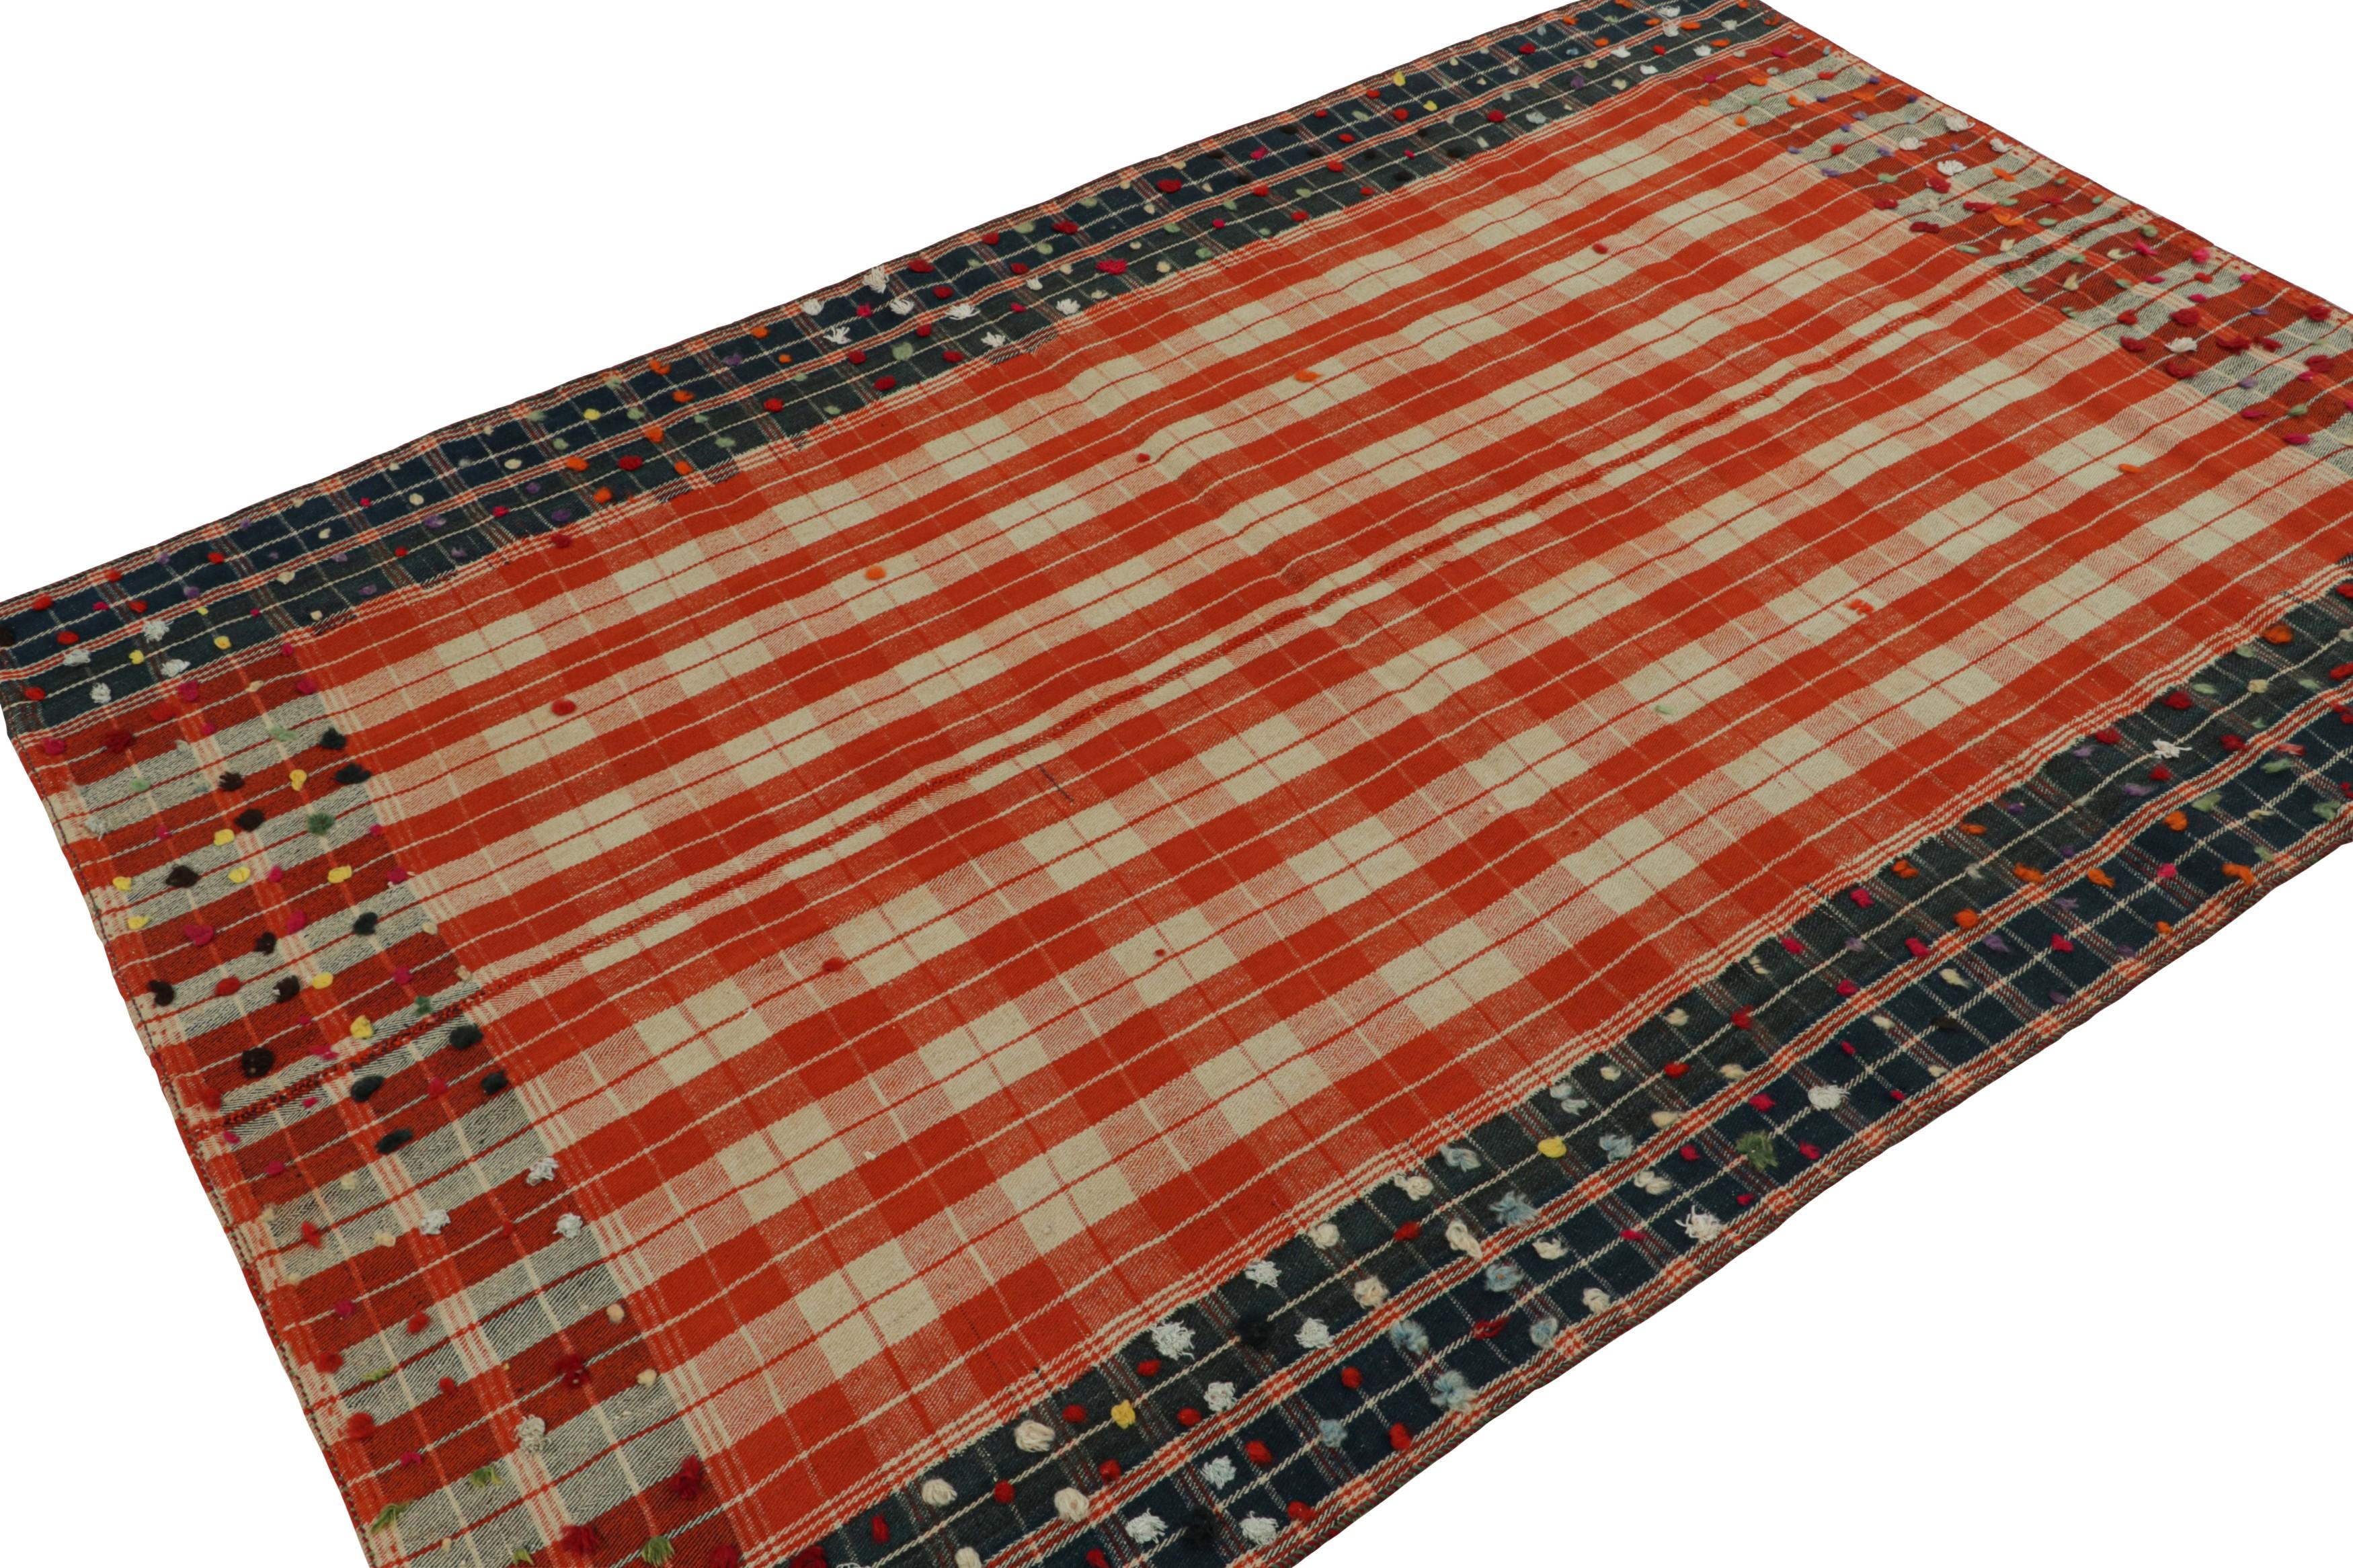 Featuring a colorway of red, blue and off-white, this 5x7 vintage Afghan tribal kilim rug, handwoven in wool, circa 1950-1960, features plaid-like play of stripes and geometric patterns, with a Persian influence. 

On the Design: 

A new curation